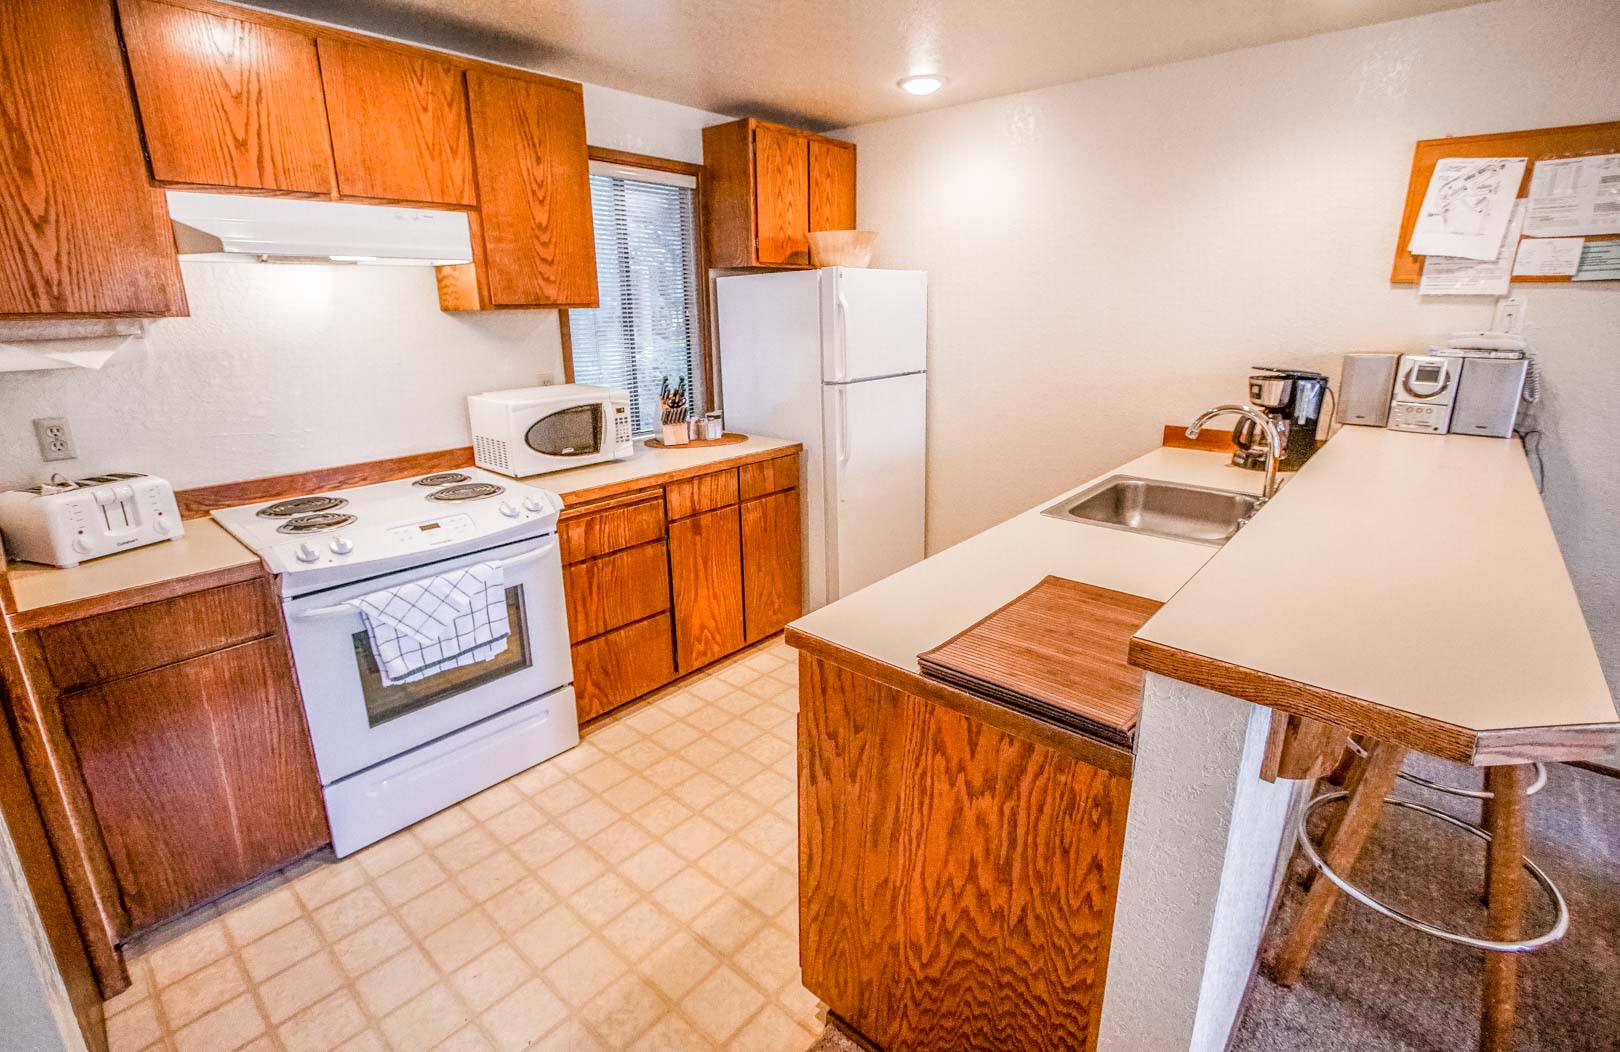 A fully equipped kitchen at VRI's Kala Point Village in Port Townsend, Washington.